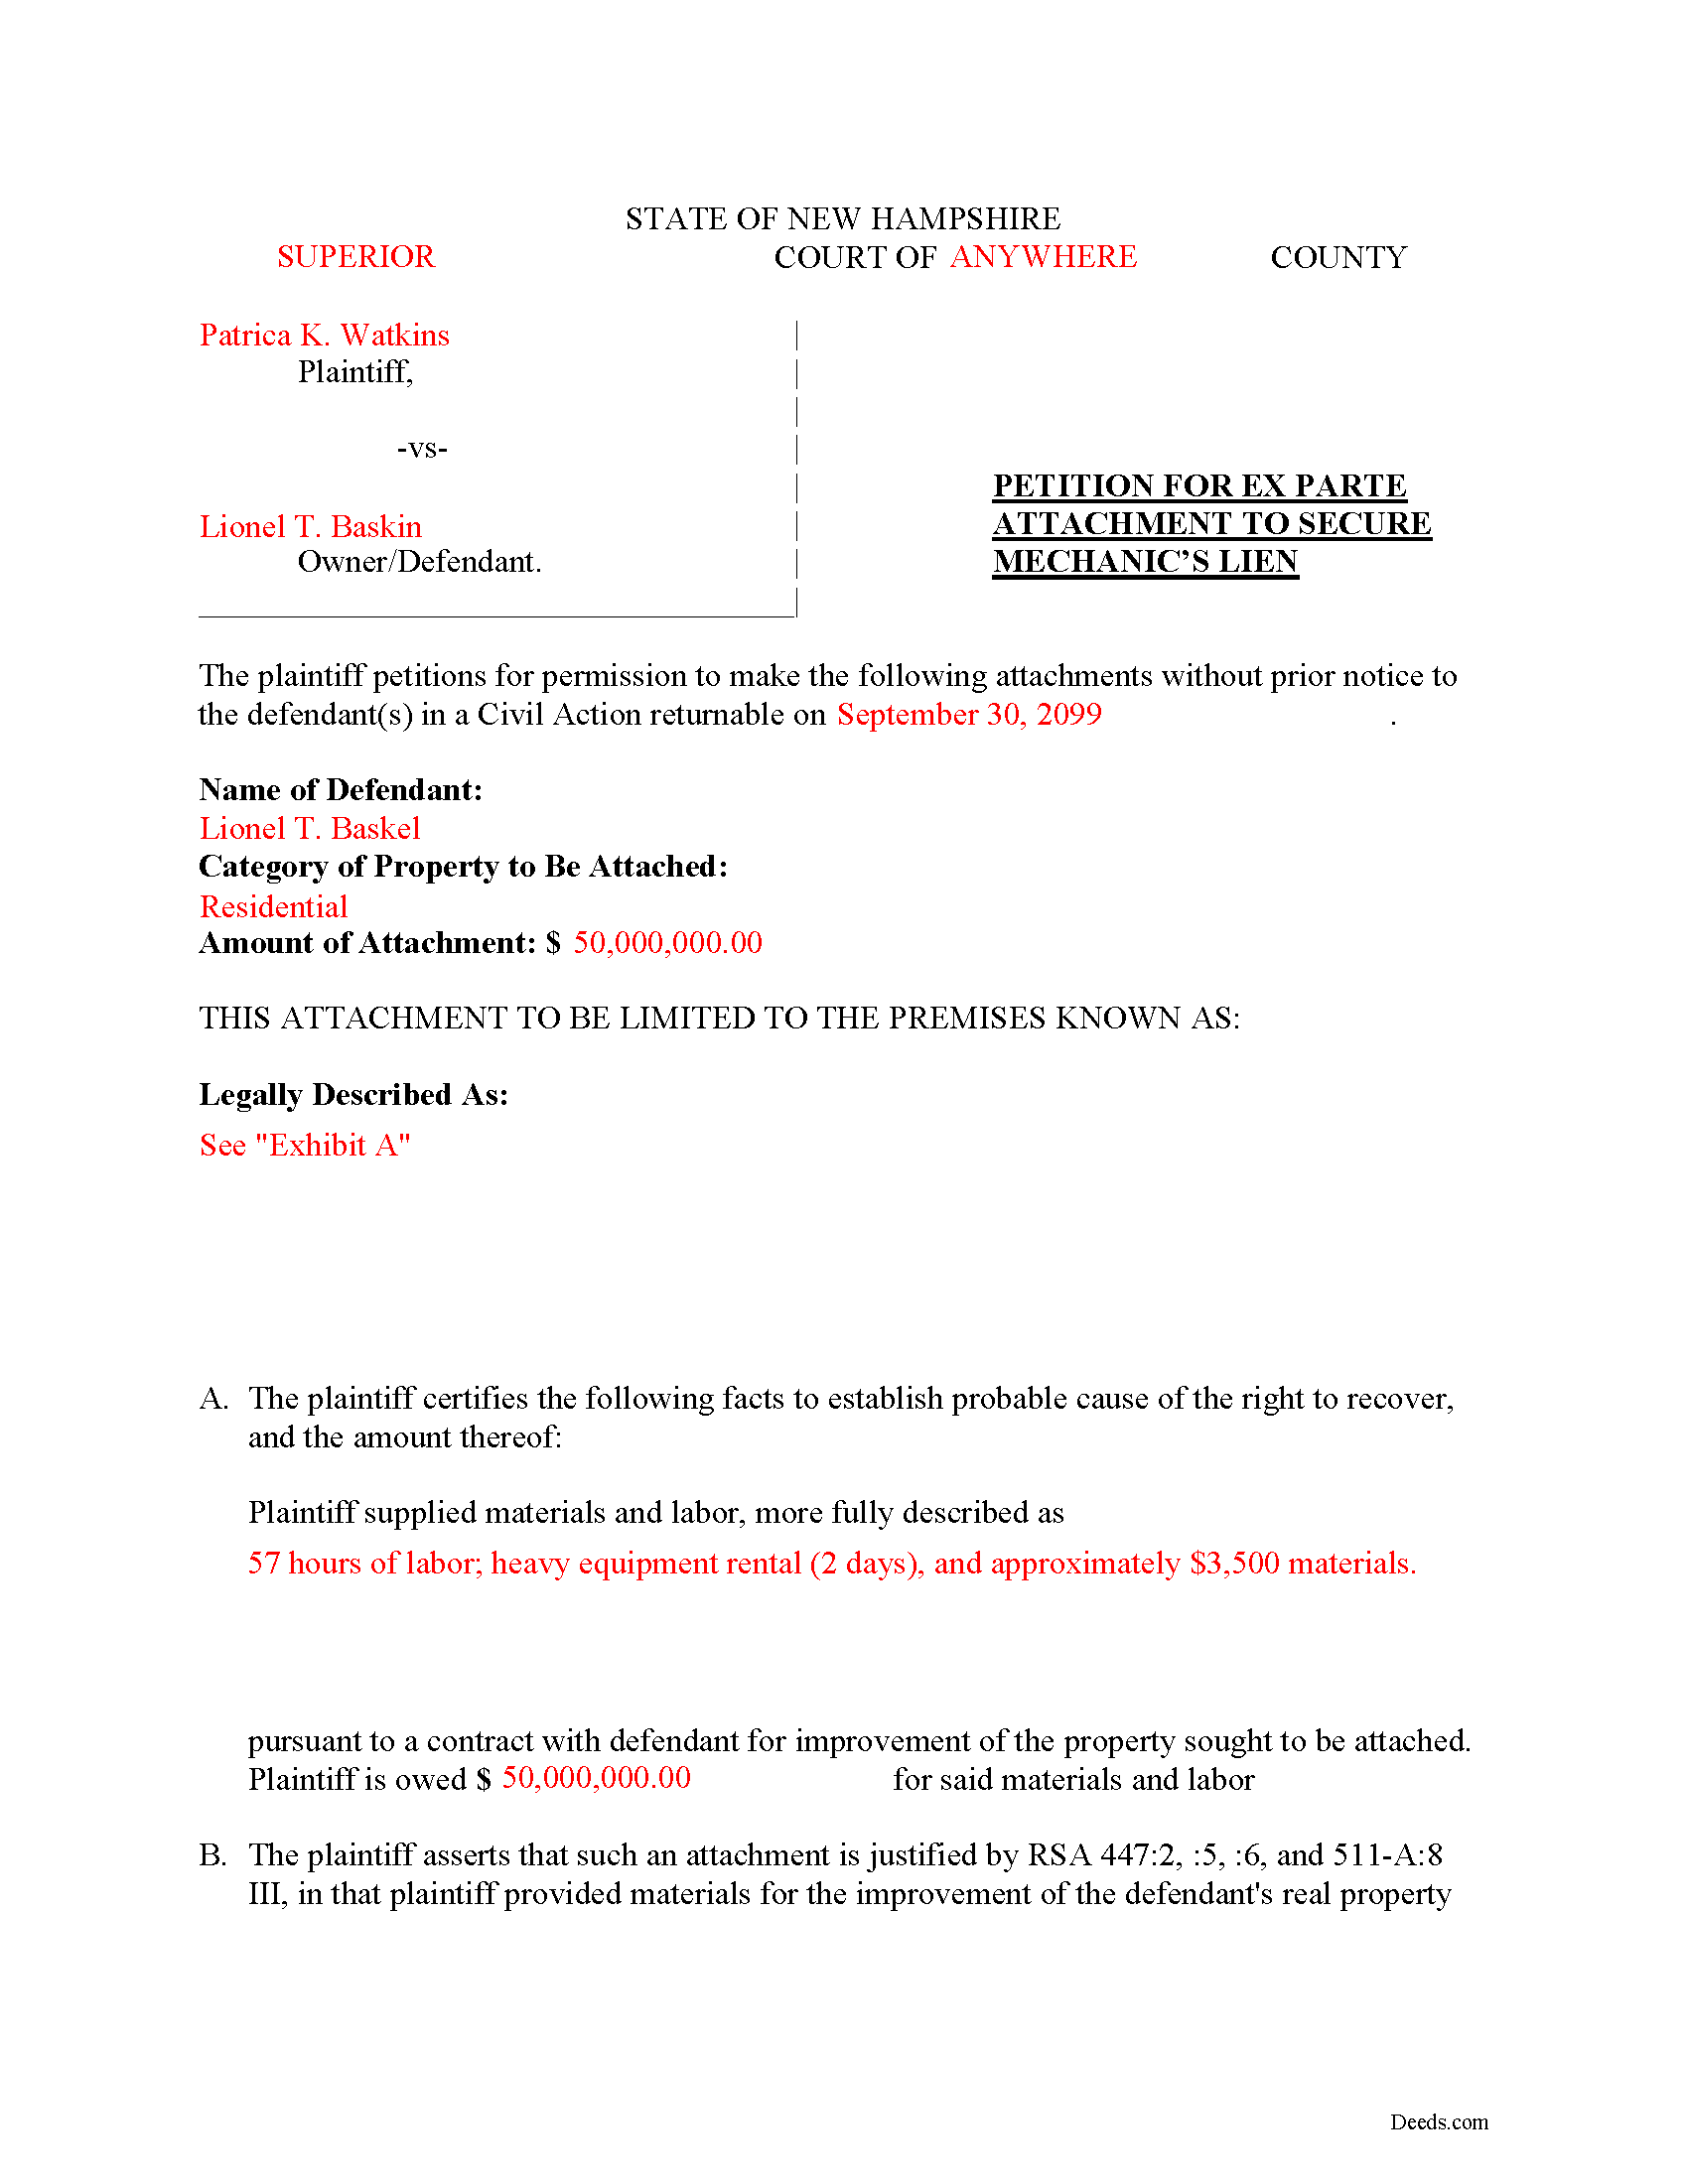 Completed Example of the Petition for Attachment Document